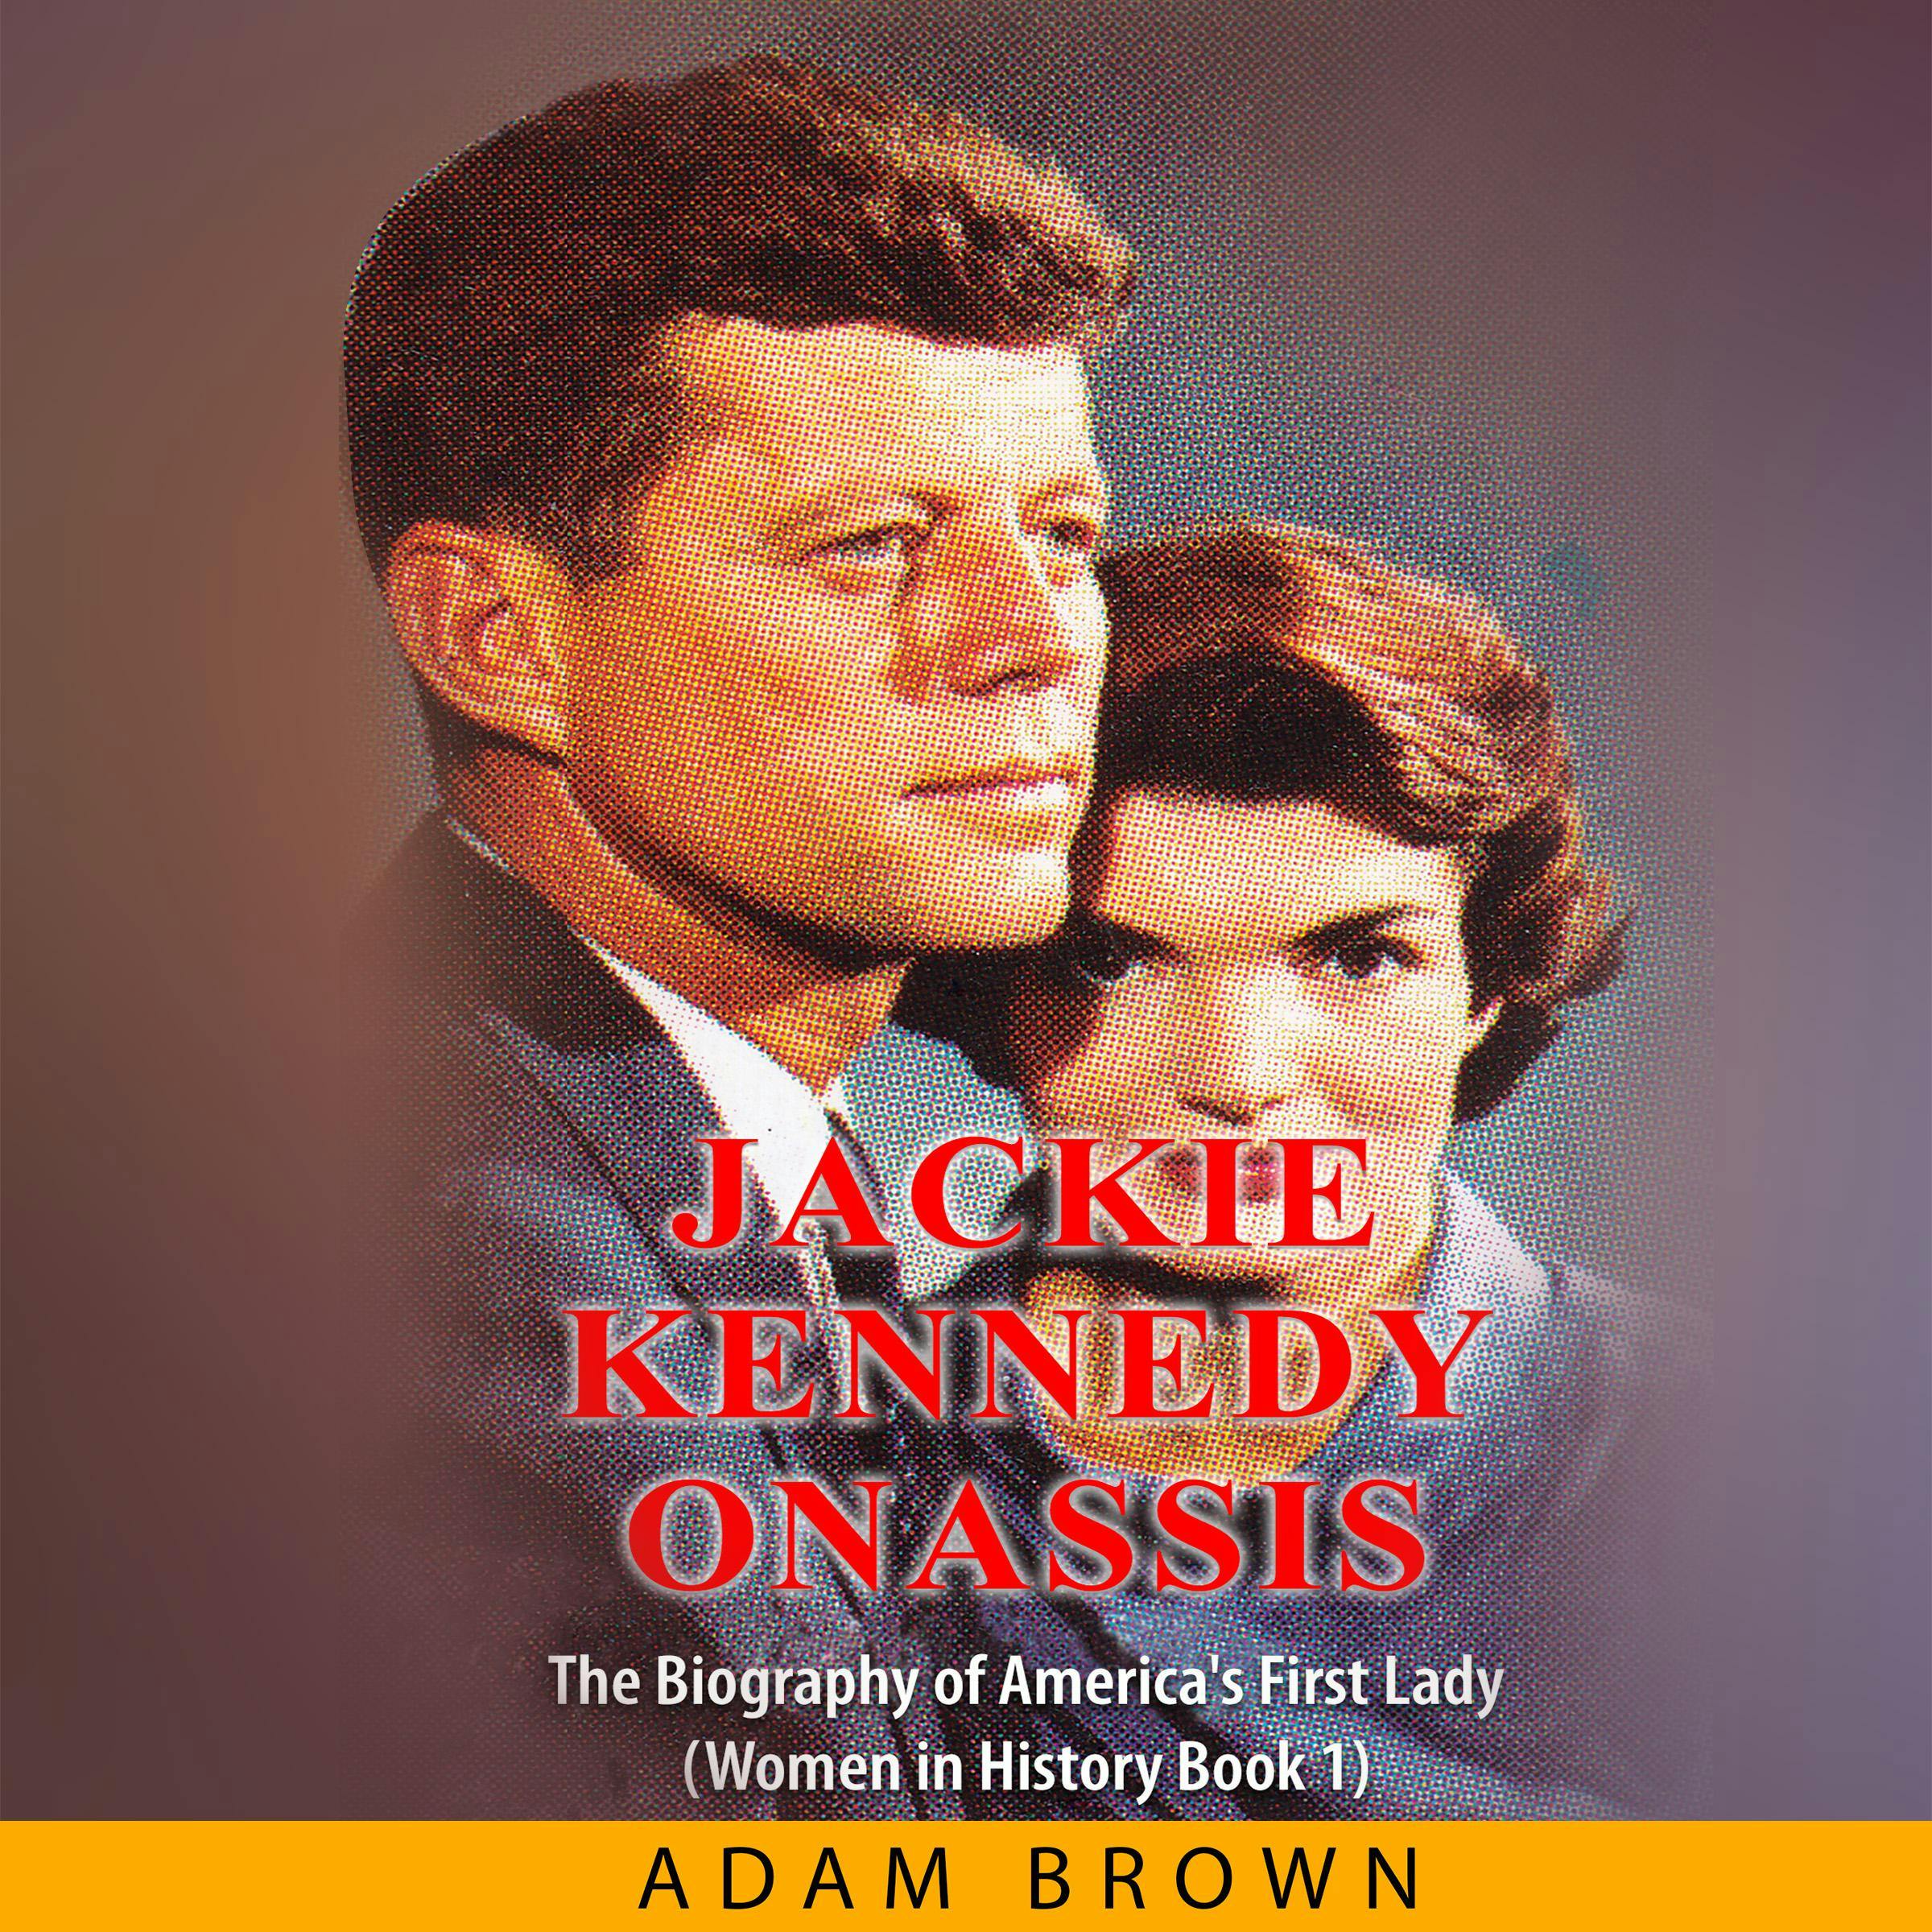 Jackie Kennedy Onassis: The Biography of America's First Lady (Women in History Book 1) - Adam Brown